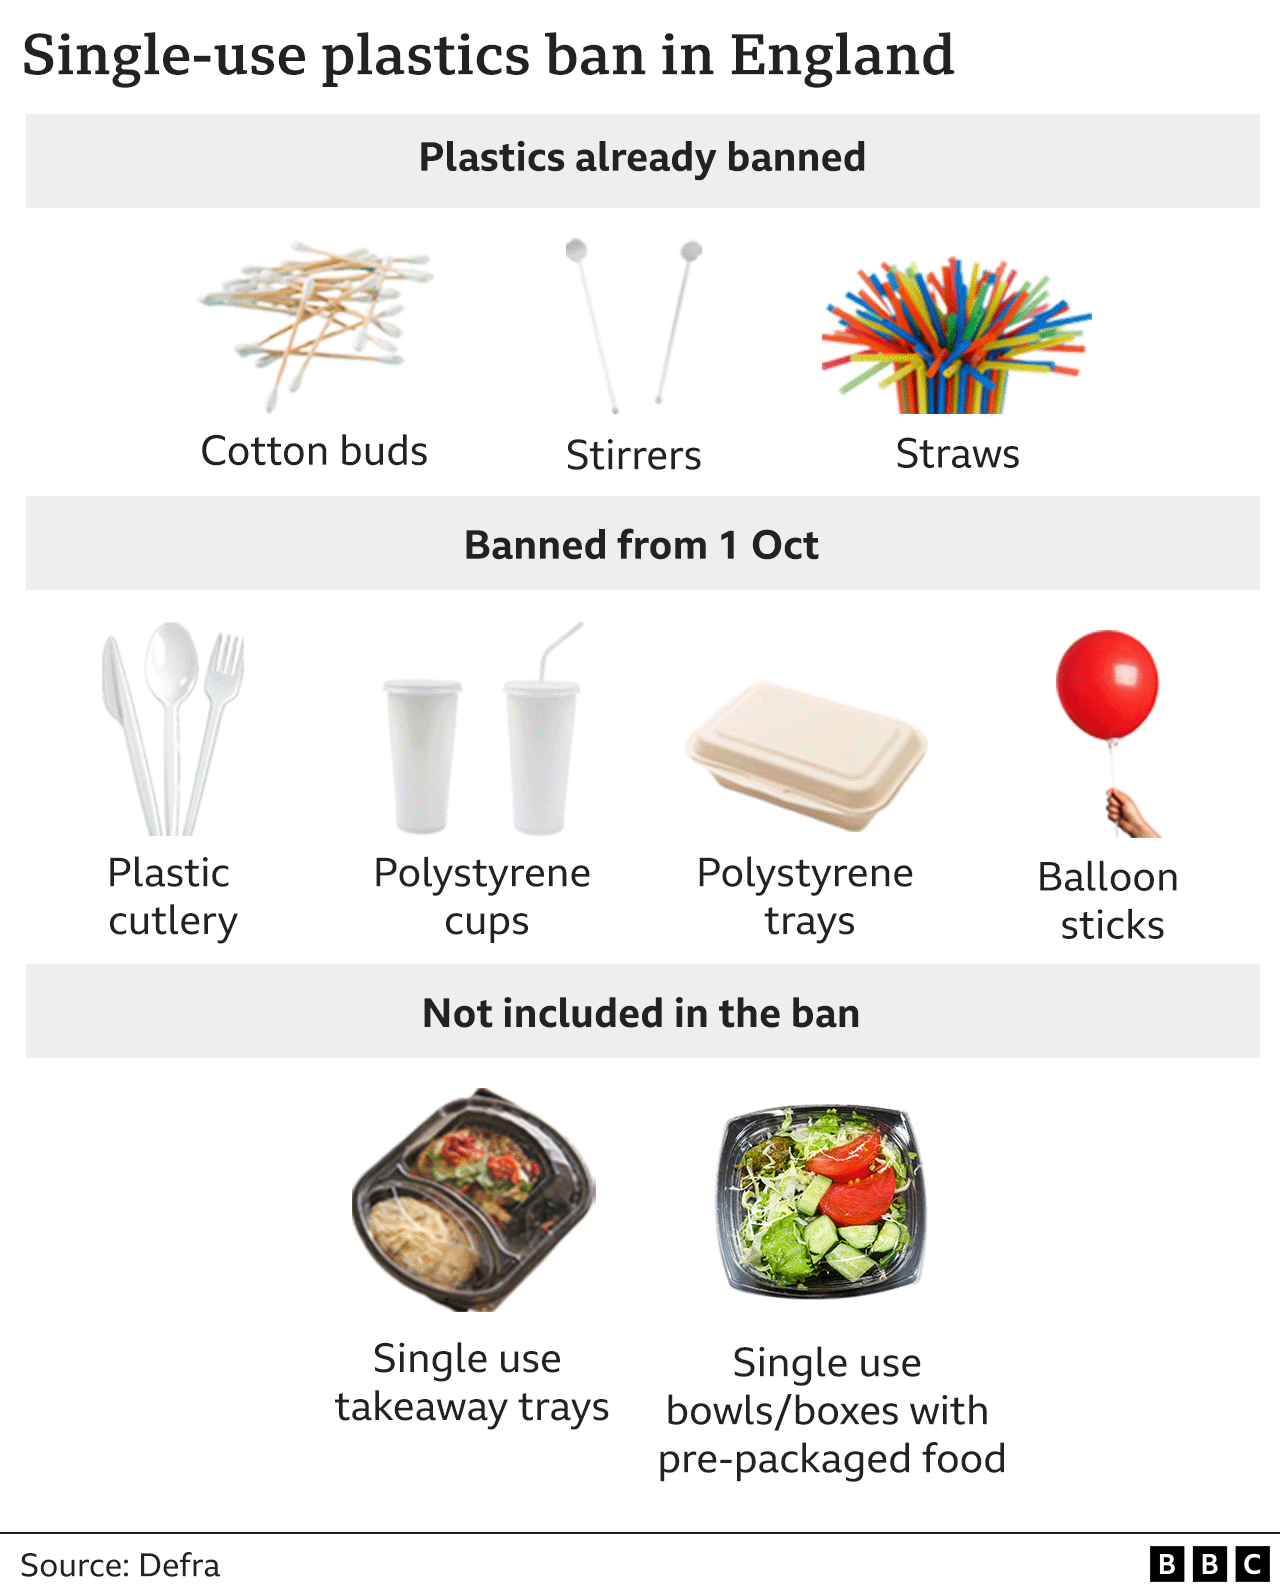 https://ichef.bbci.co.uk/news/640/cpsprodpb/10D04/production/_131286886_single_use_plastics_2x640-nc.png